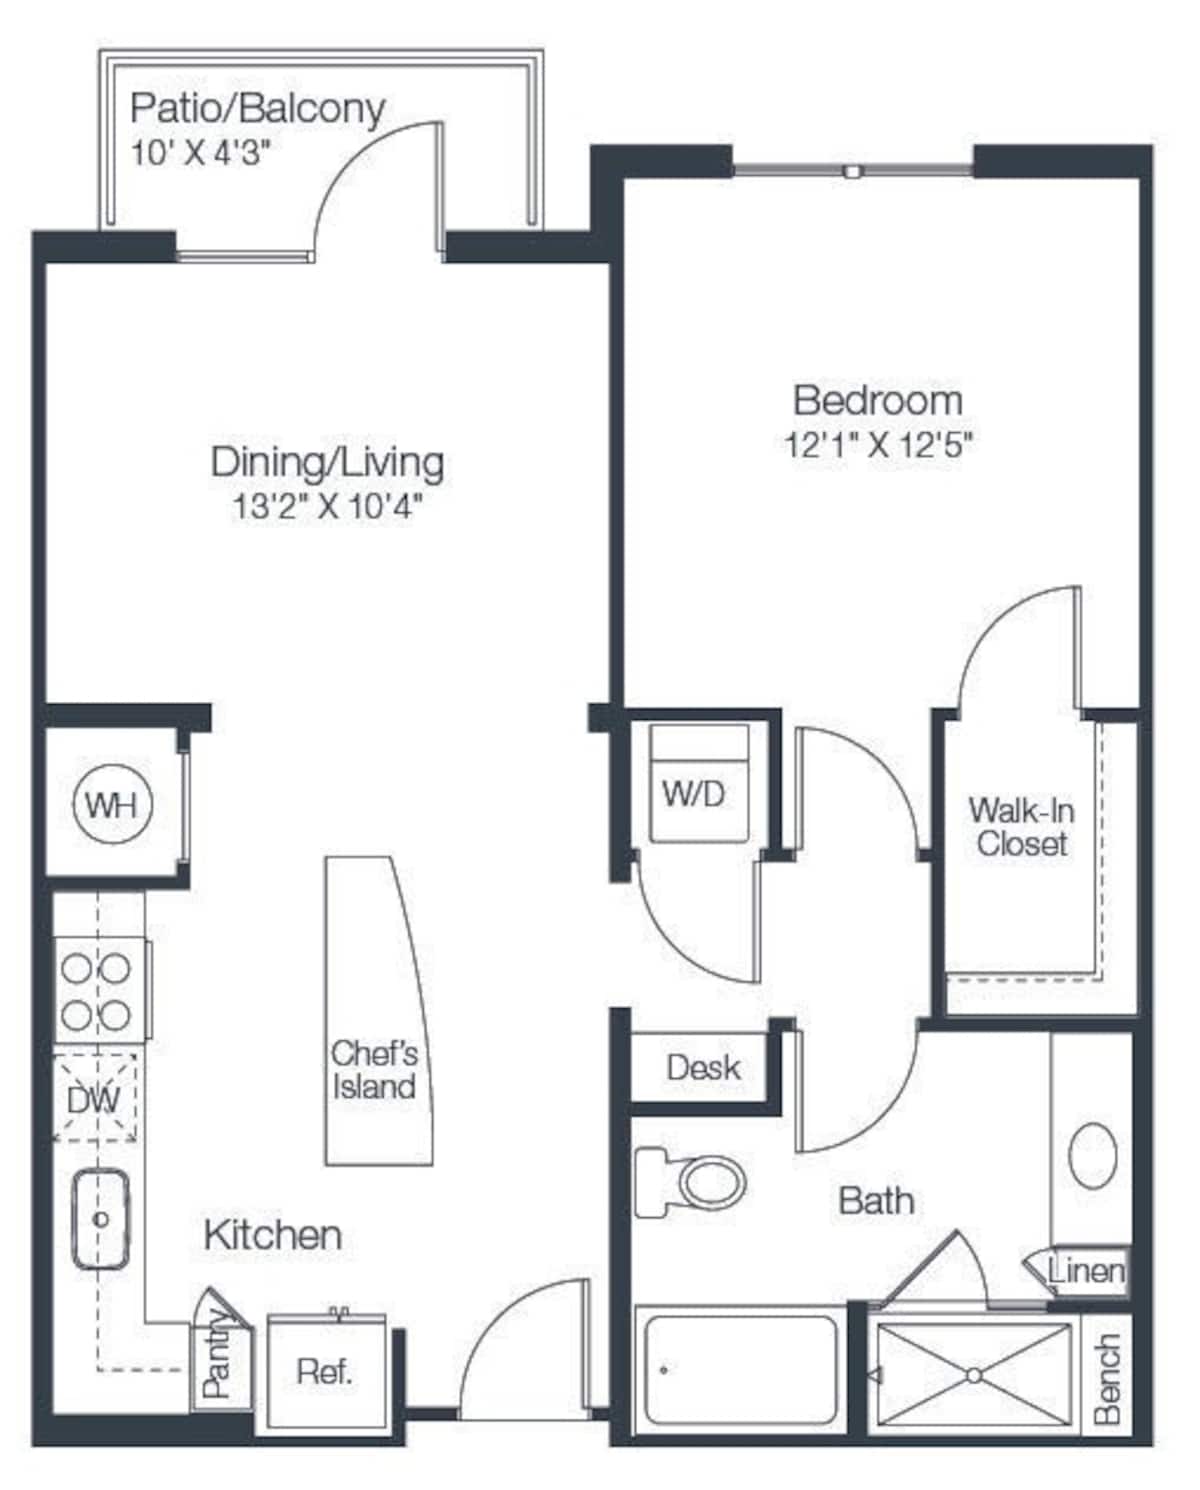 Floorplan diagram for A2a, showing 1 bedroom